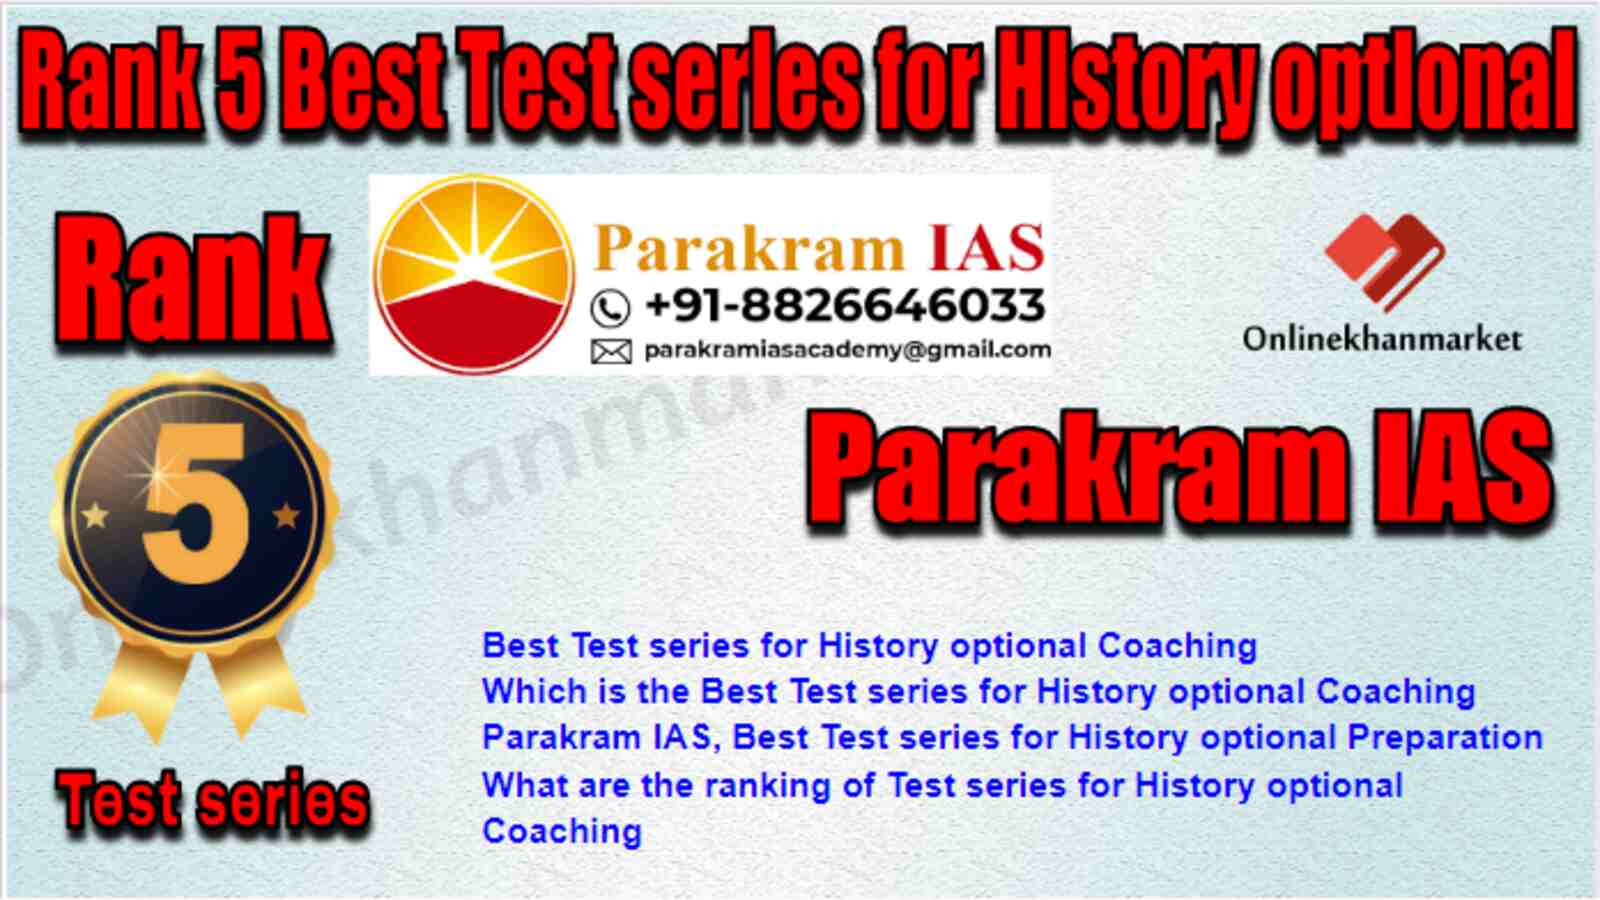 Rank 5 Best Test series for History optional